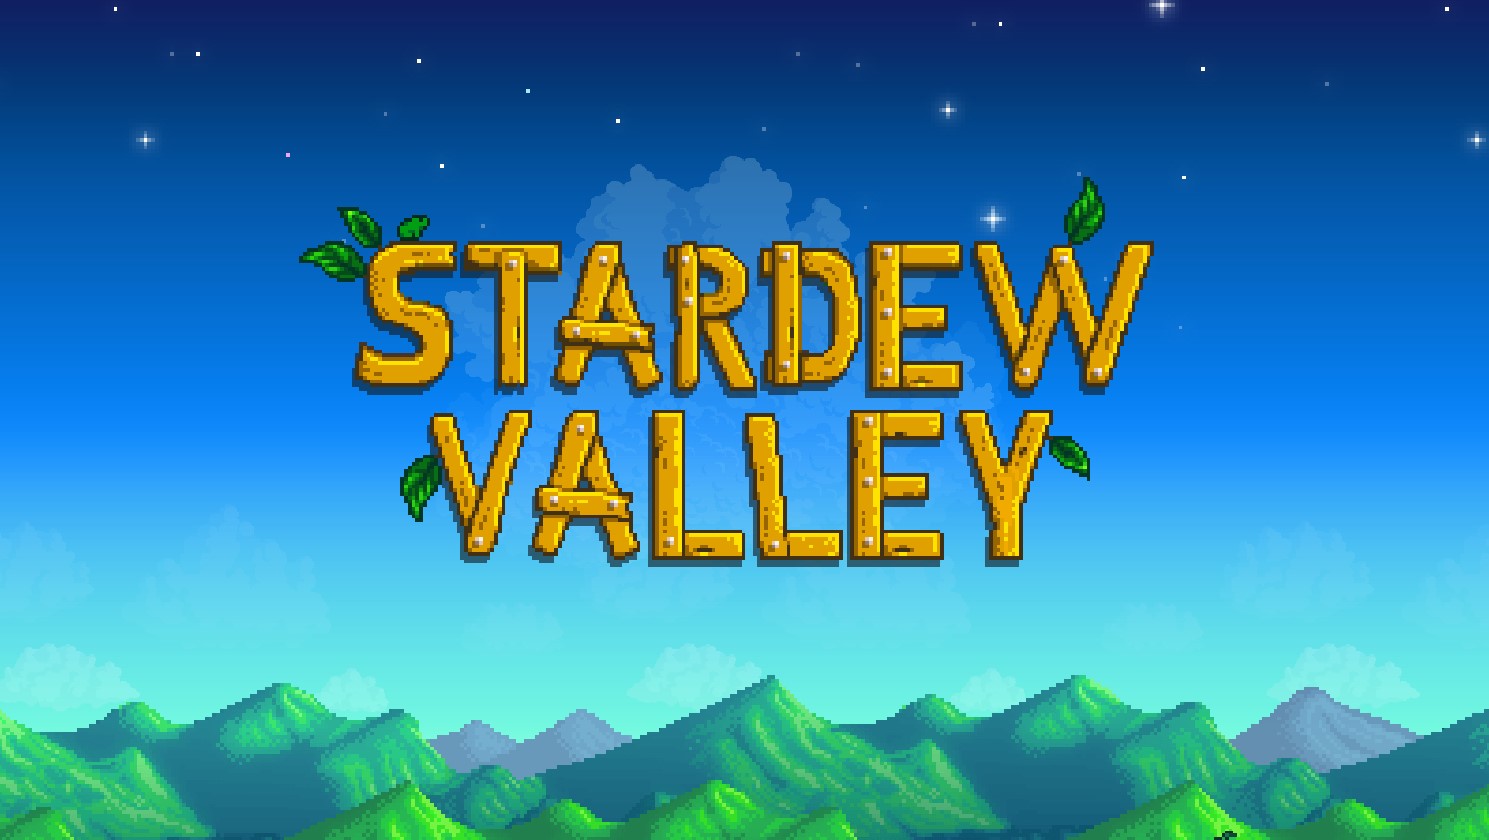 Stardew Valley Is My Favorite Game When I'm Feeling Anxious